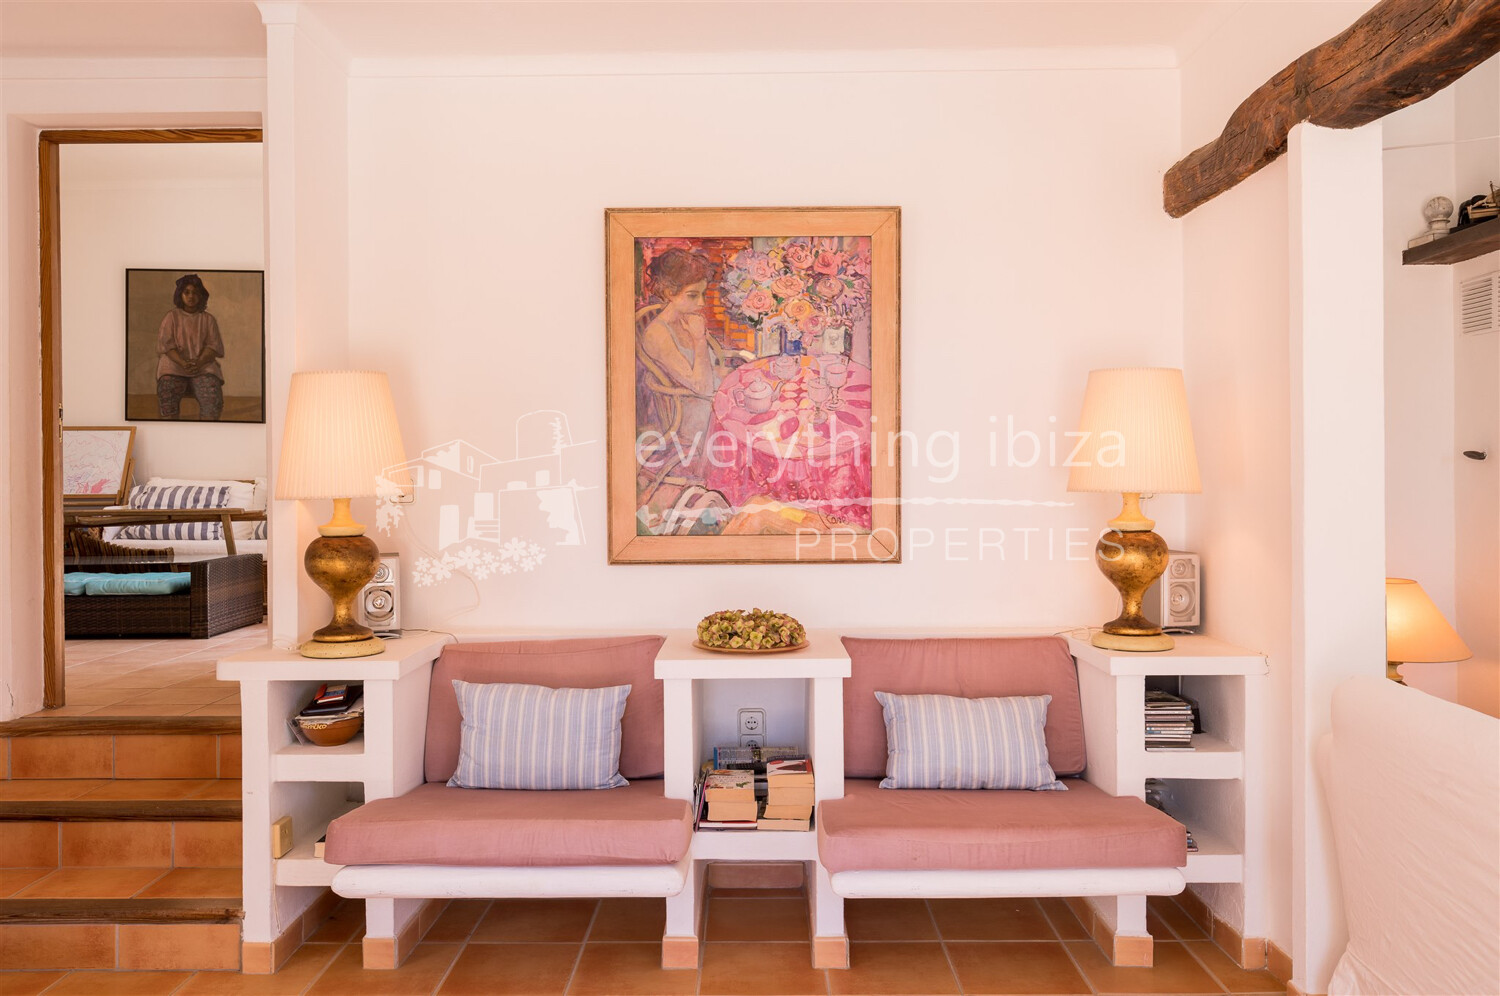 Beautiful Stylish Villa Near to the Beach with Sea & Sunset Views, ref. 1605, for sale in Ibiza by everything ibiza Properties